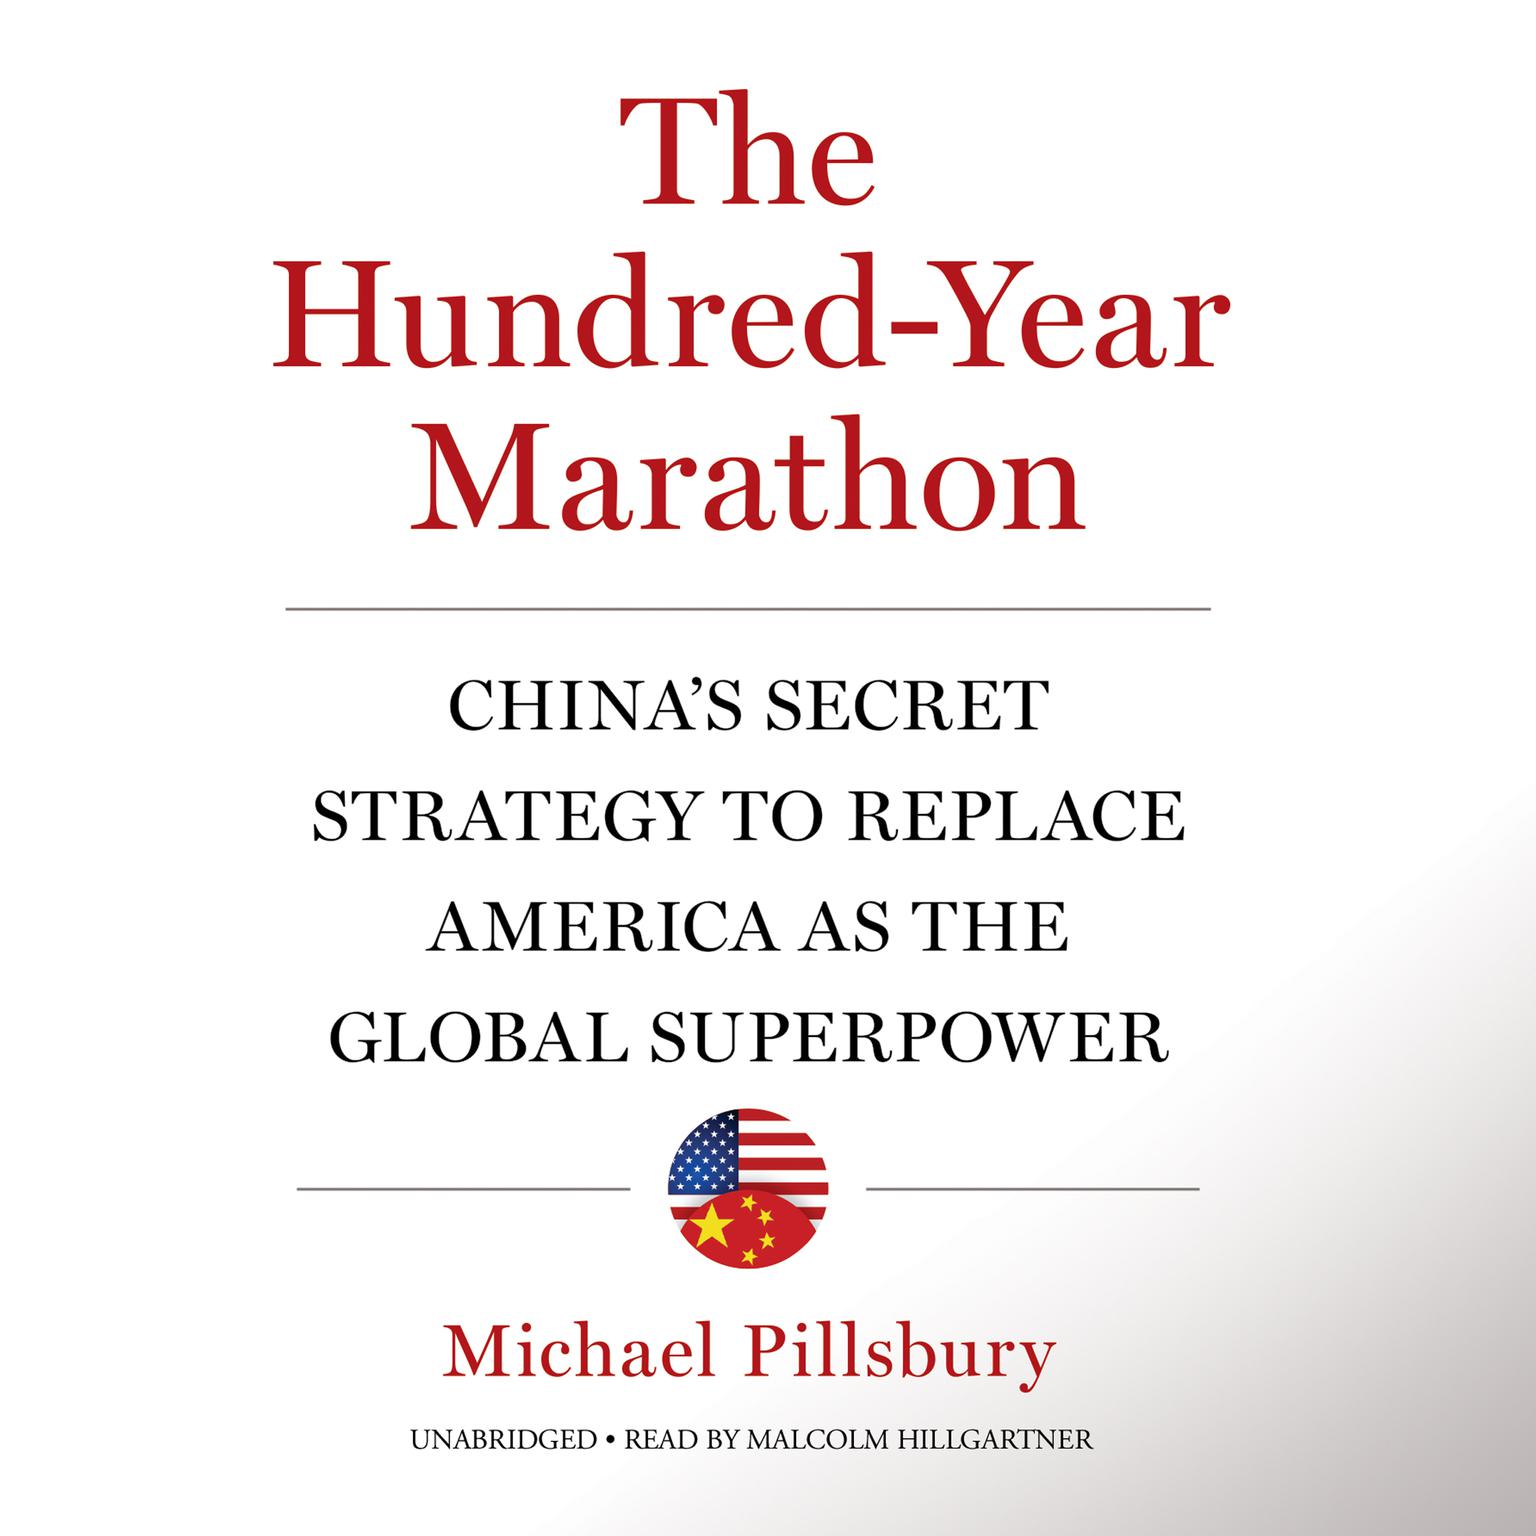 The Hundred-Year Marathon: China’s Secret Strategy to Replace America as the Global Superpower Audiobook, by Michael Pillsbury